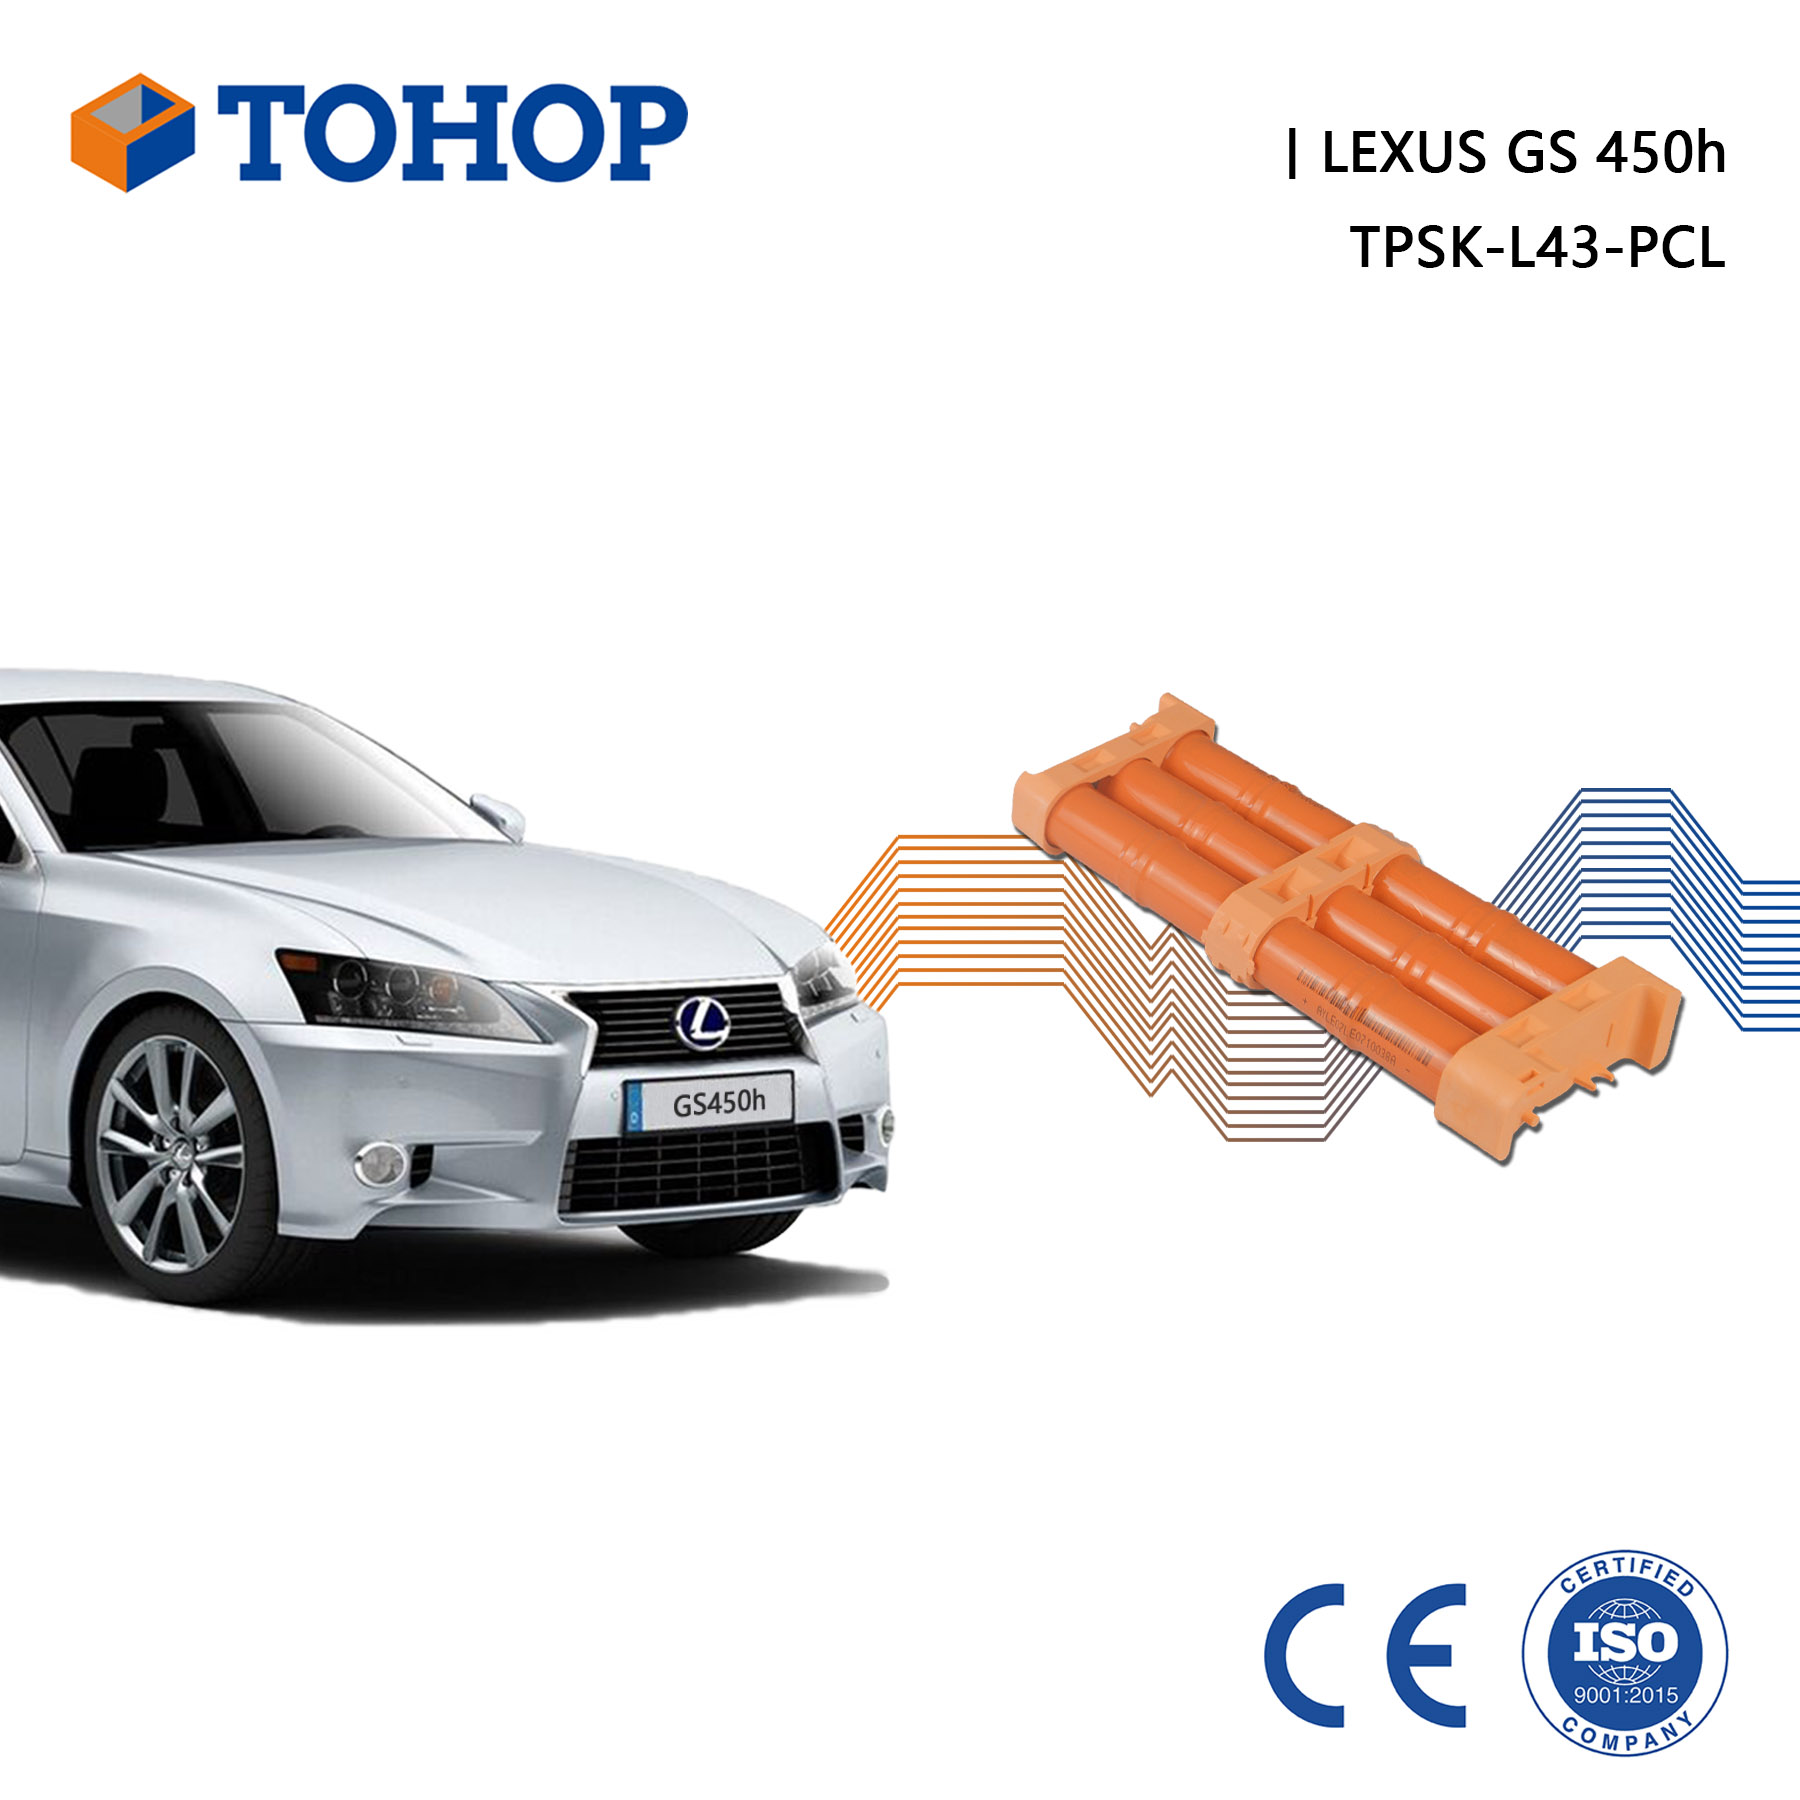 GS450h Thrid Gen. S190 Replacement Hybrid Car Battery Pack for Lexus